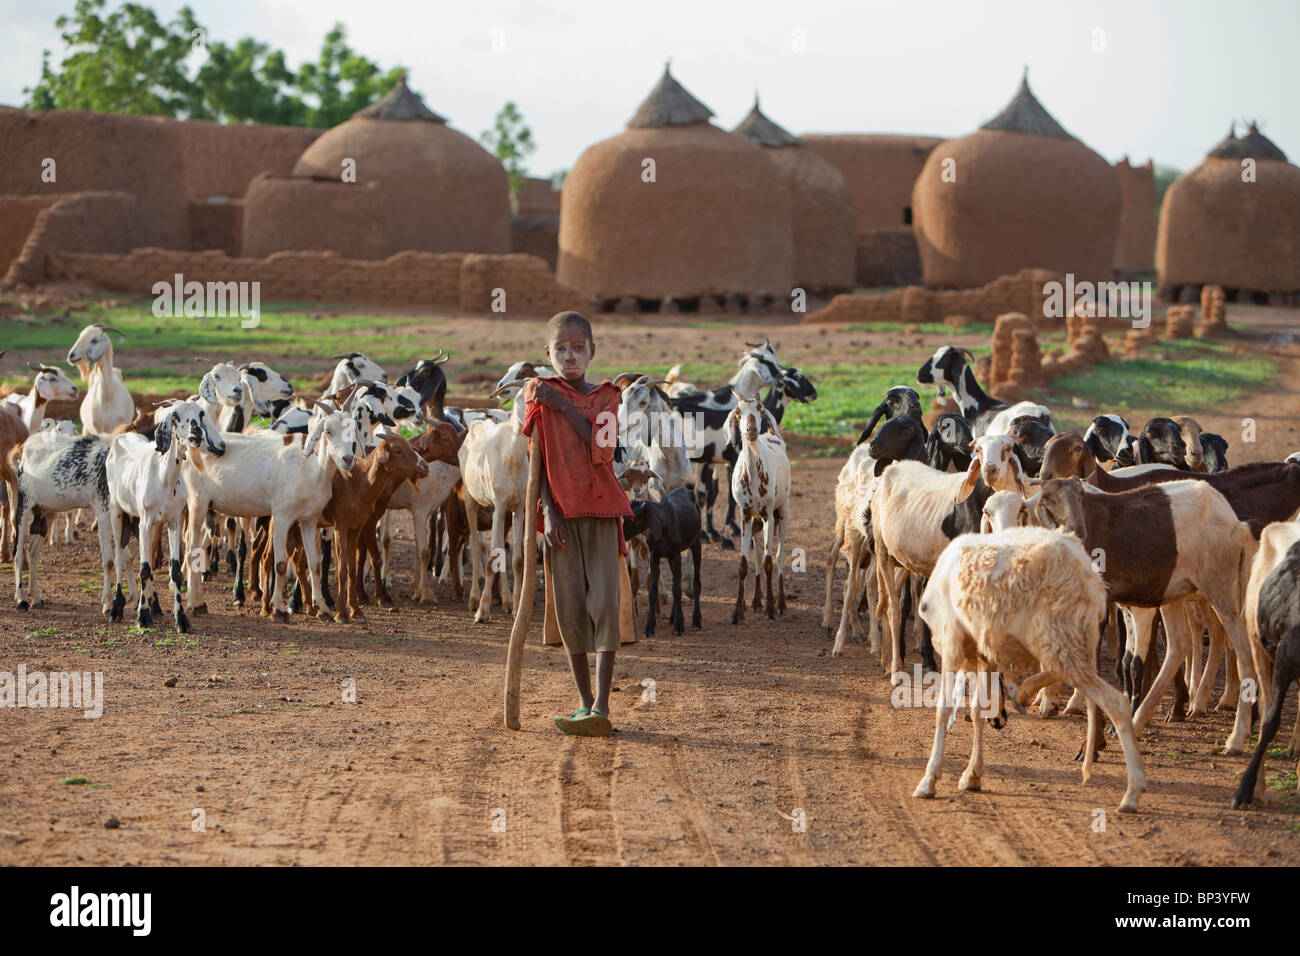 ZANTARAM VILLAGE, 5 kms WEST OF GUIDAM IDER, NIGER, 27TH JULY 2010: a young shepherd brings his animals home at the end of day. Stock Photo